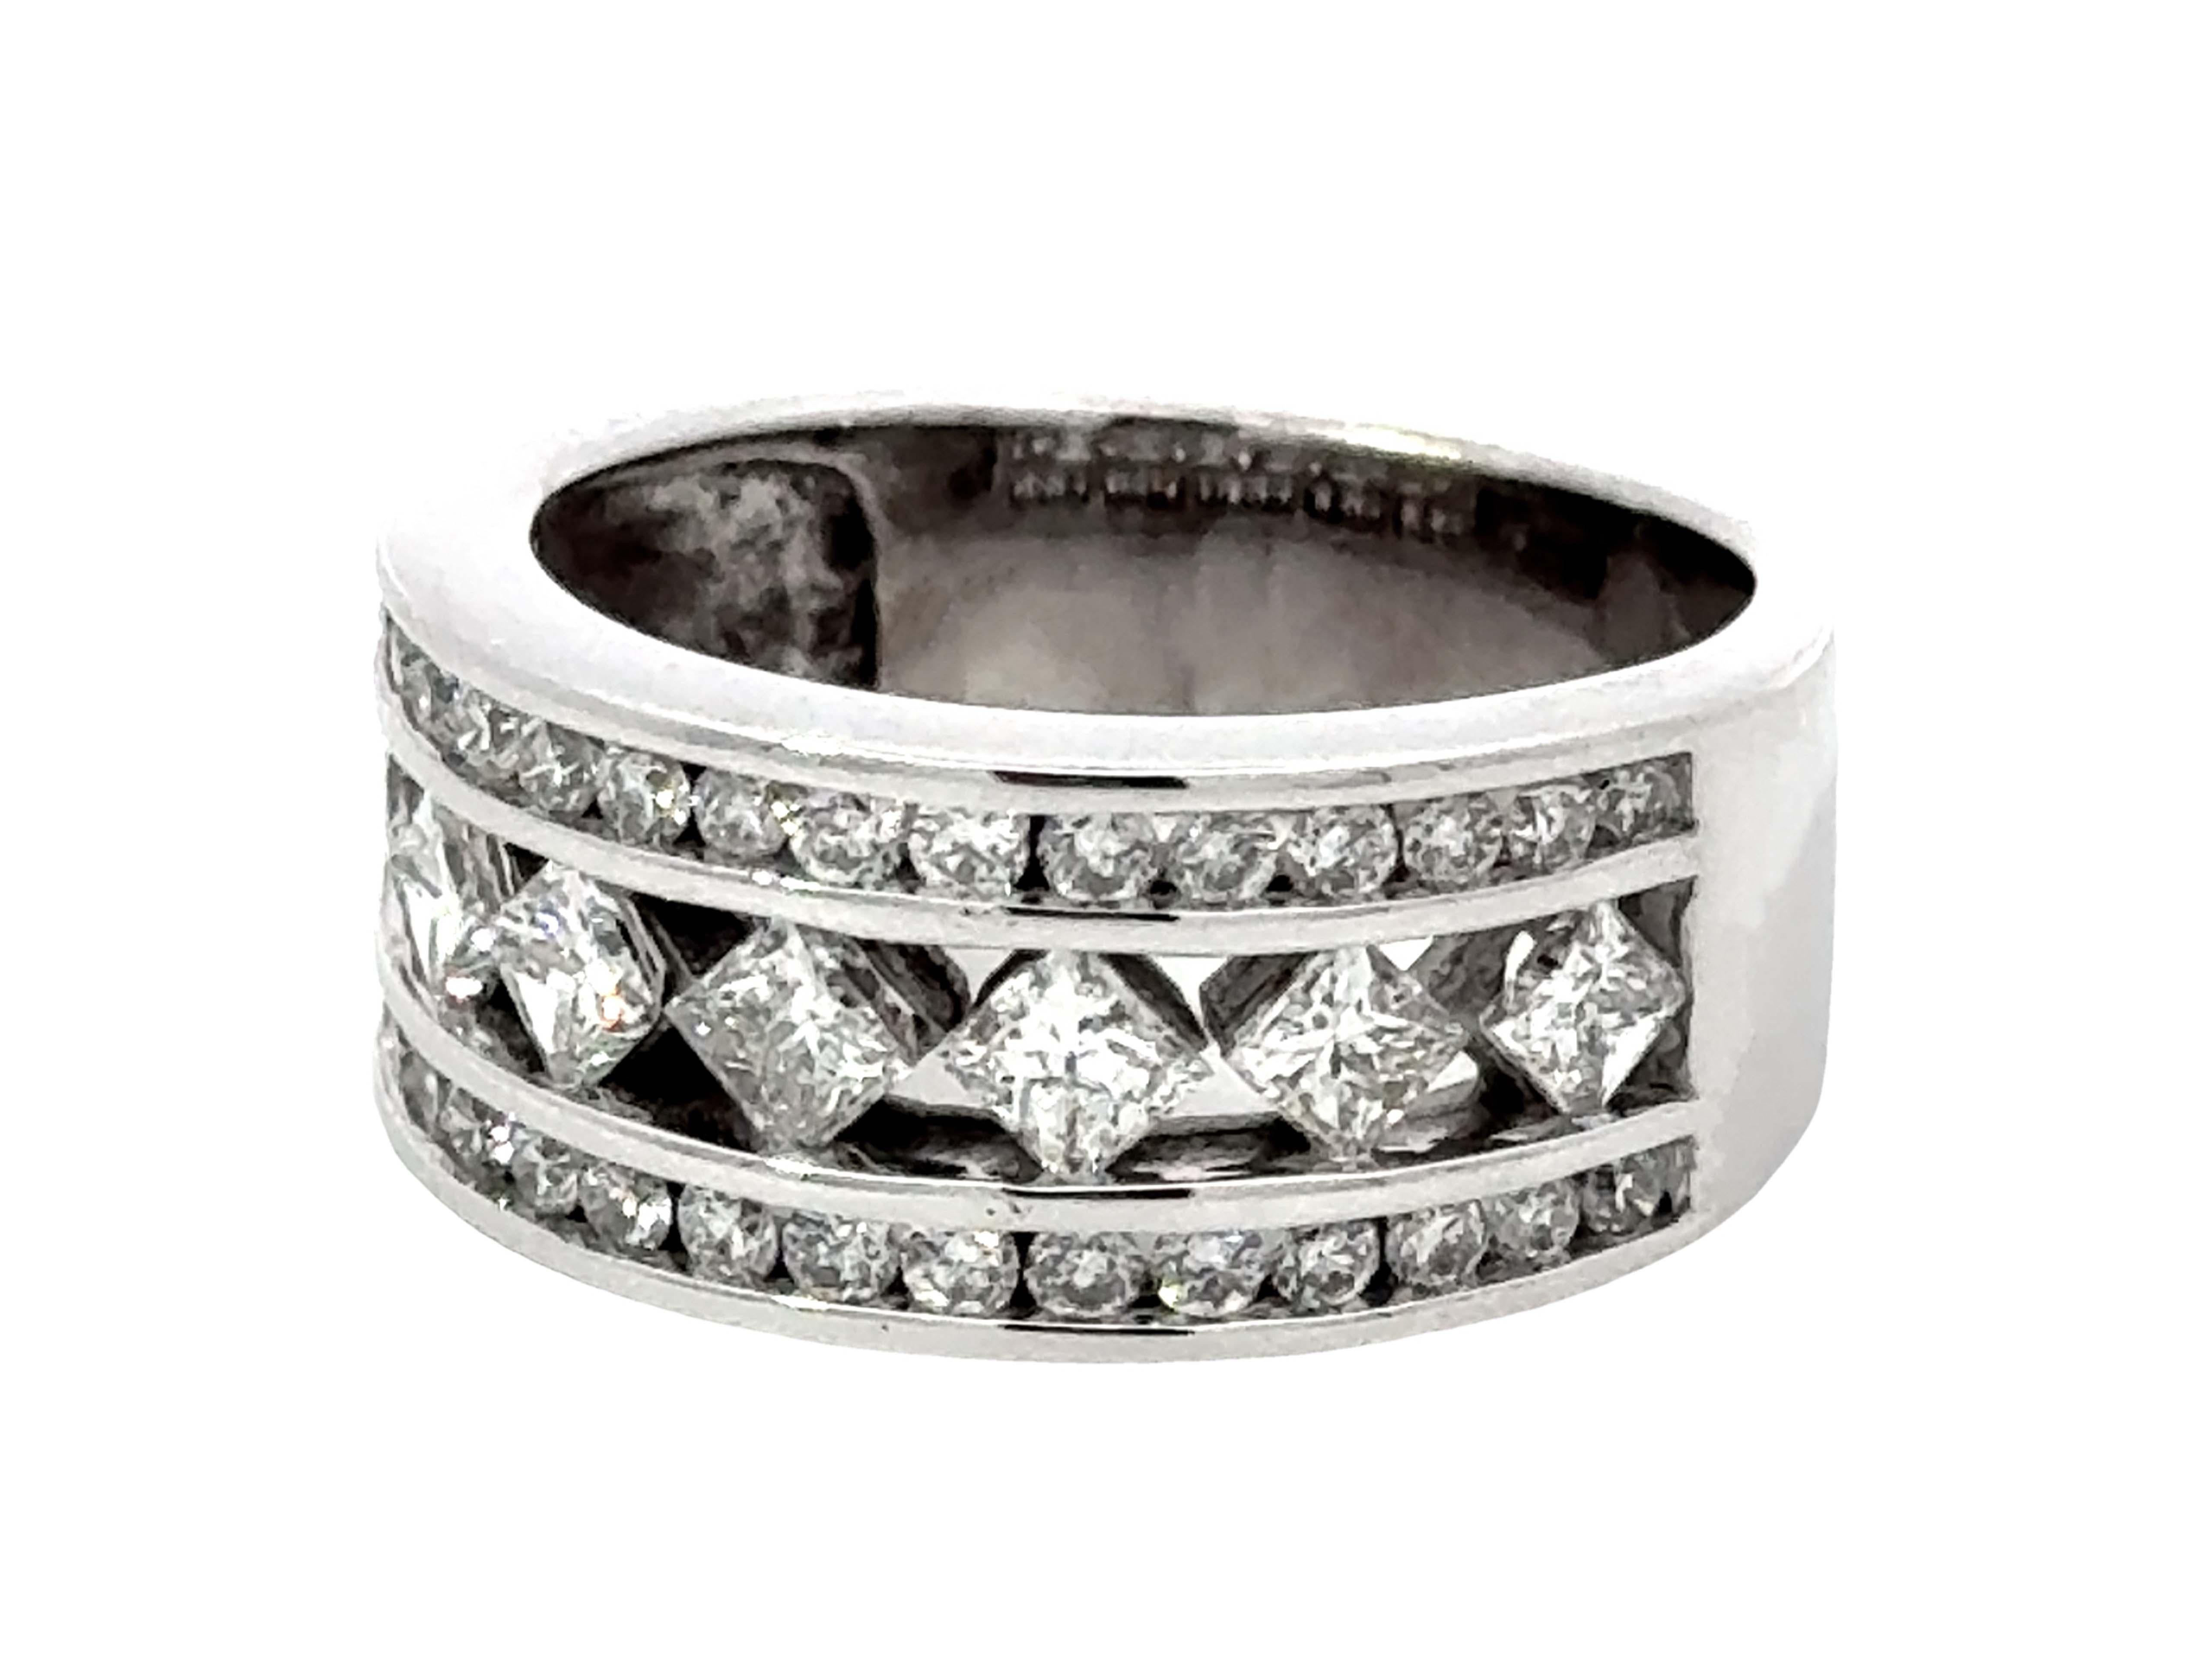 Princess Cut and Brilliant Cut Wide Diamond Band Ring 14k White Gold In Excellent Condition For Sale In Honolulu, HI